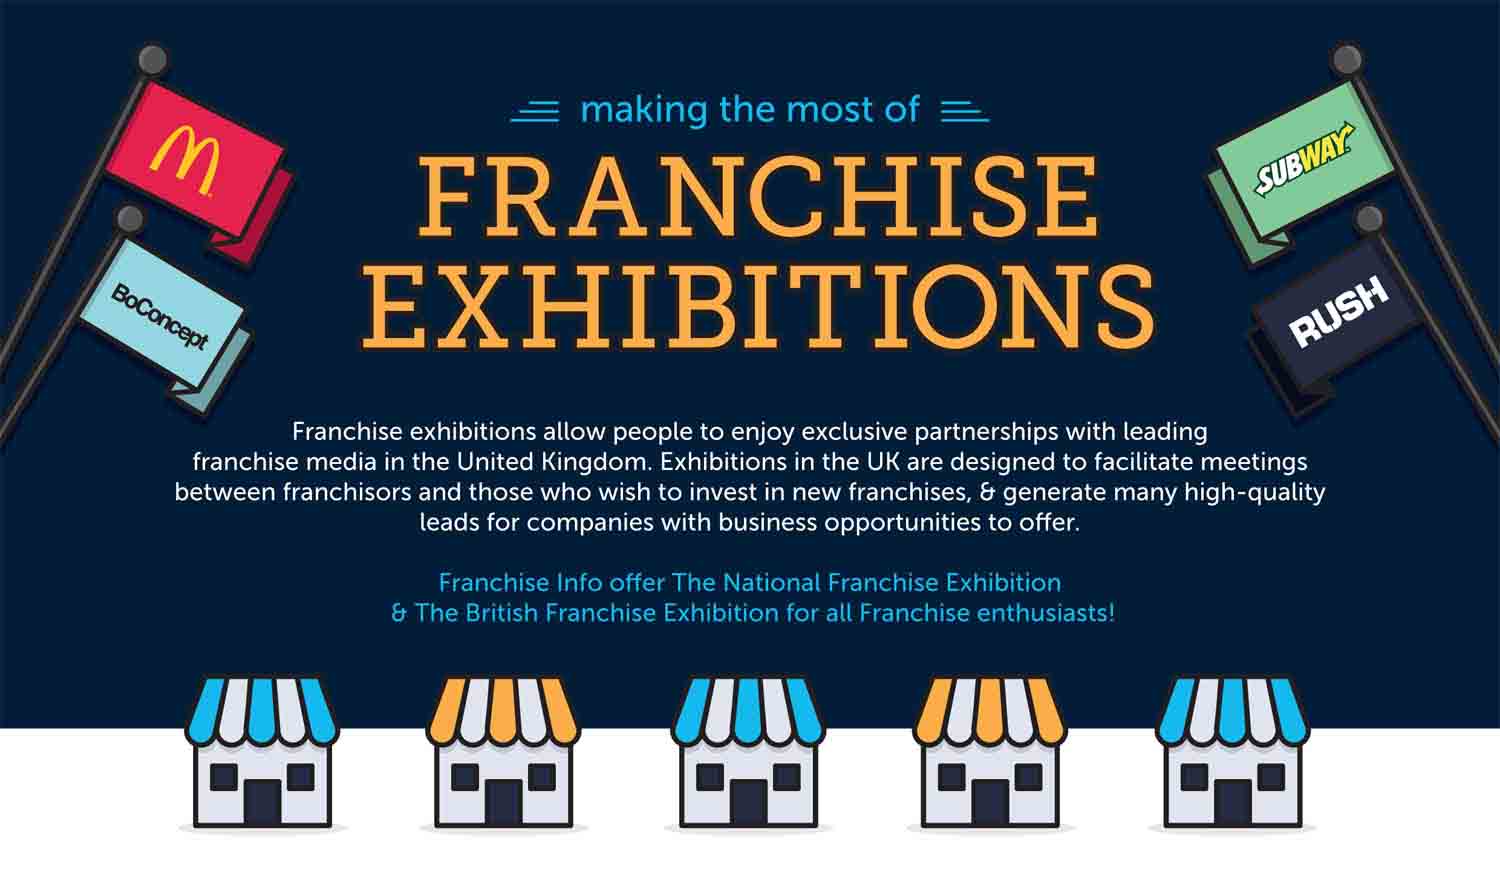 Making The Most of Franchise Exhibitions [Infographic]